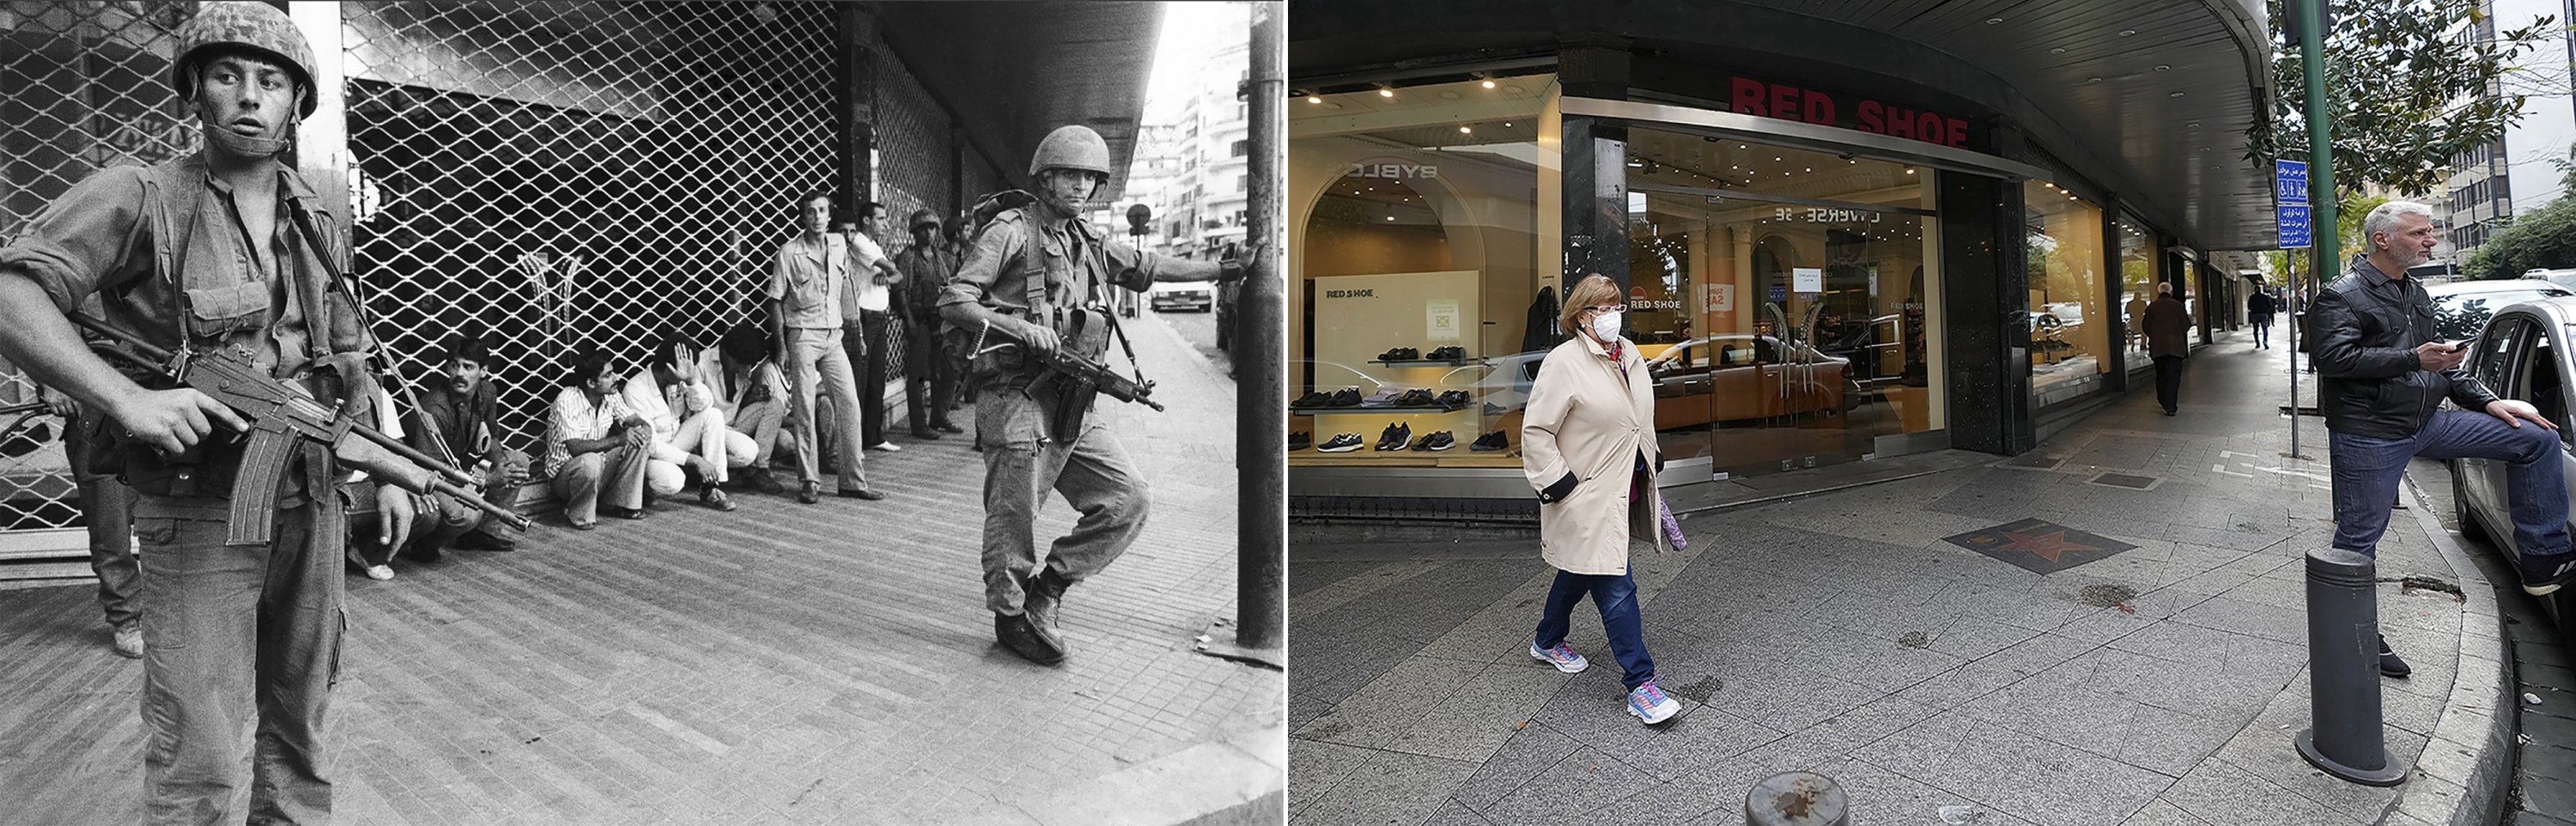 A combo picture shows at left, Israeli soldiers following a shooting incident in Hamra, the main shopping thoroughfare in West Beirut, on Sept. 24, 1982, when at least one Israeli soldier was badly injured, his colleagues commenced a round-up of suspects and made them sit on a sidewalk, until they were closely questioned and produced proper identification. They were all later released. At the right, a woman passes on the same corner at Hamra street, in Beirut, Lebanon, Jan. 14, 2022. (AP Photo)